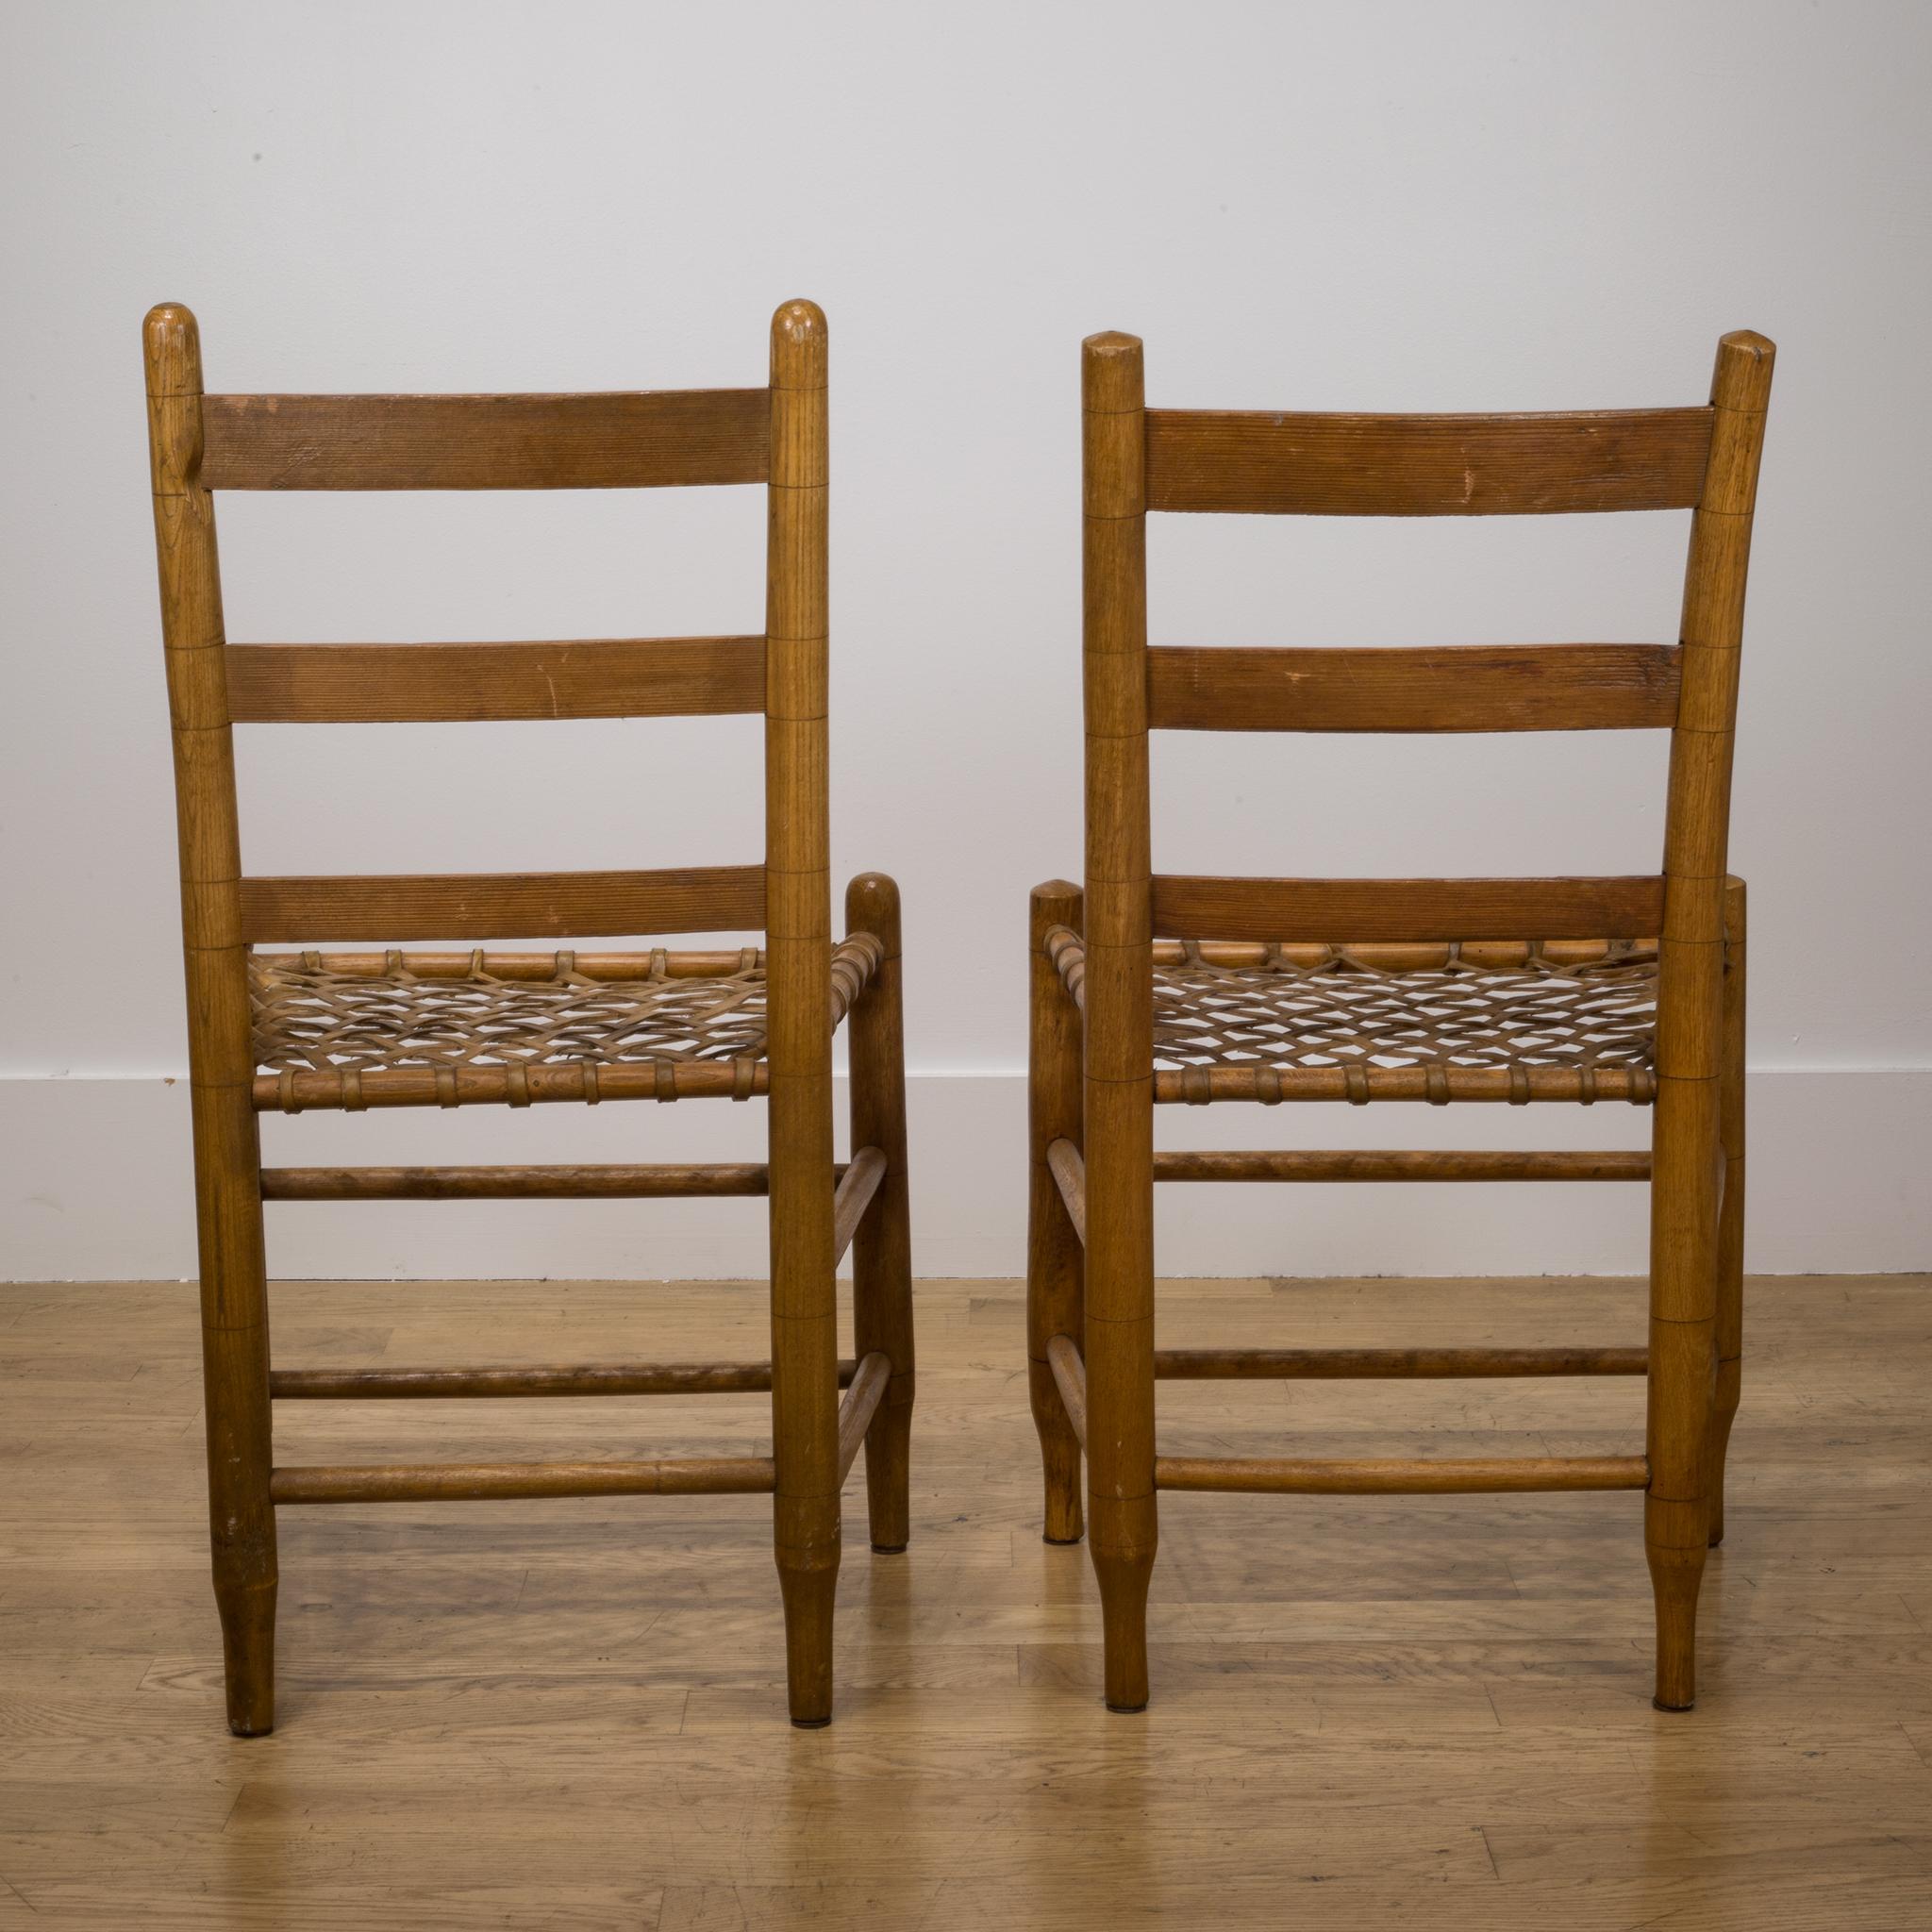 19th Century Rawhide Chairs from Historic Oregon Commune, circa 1856 1